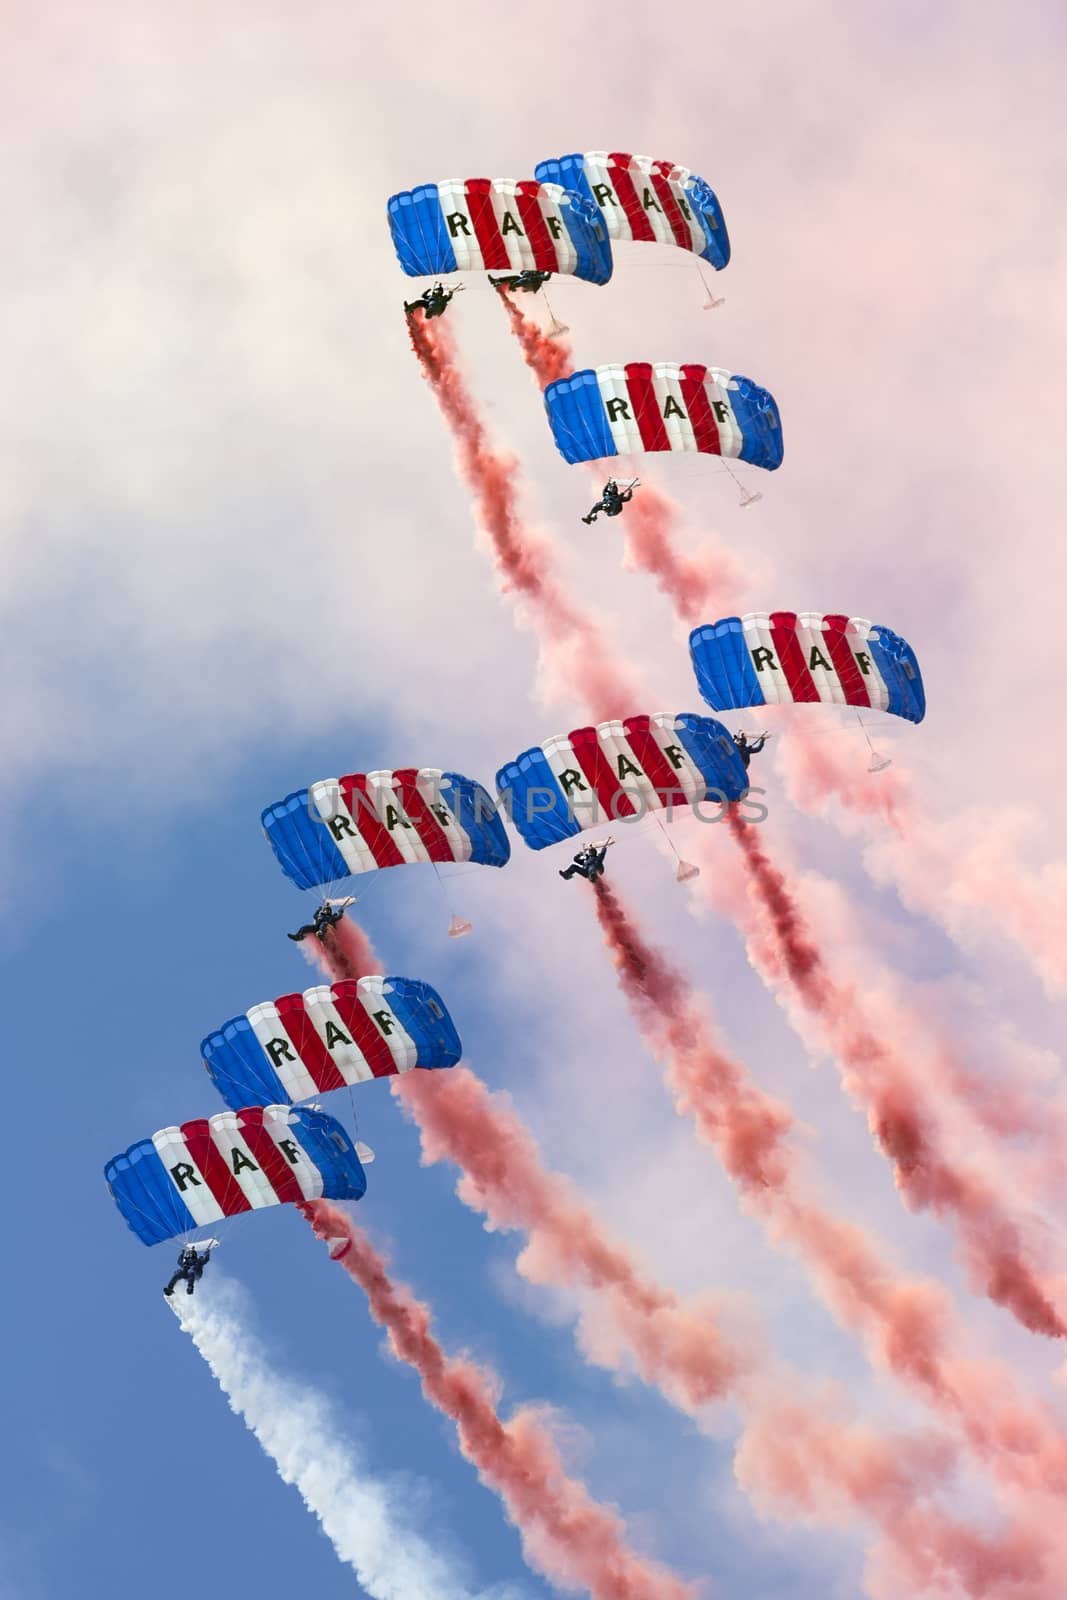 The Royal Air Force Falcons Parachute Display Team in action 